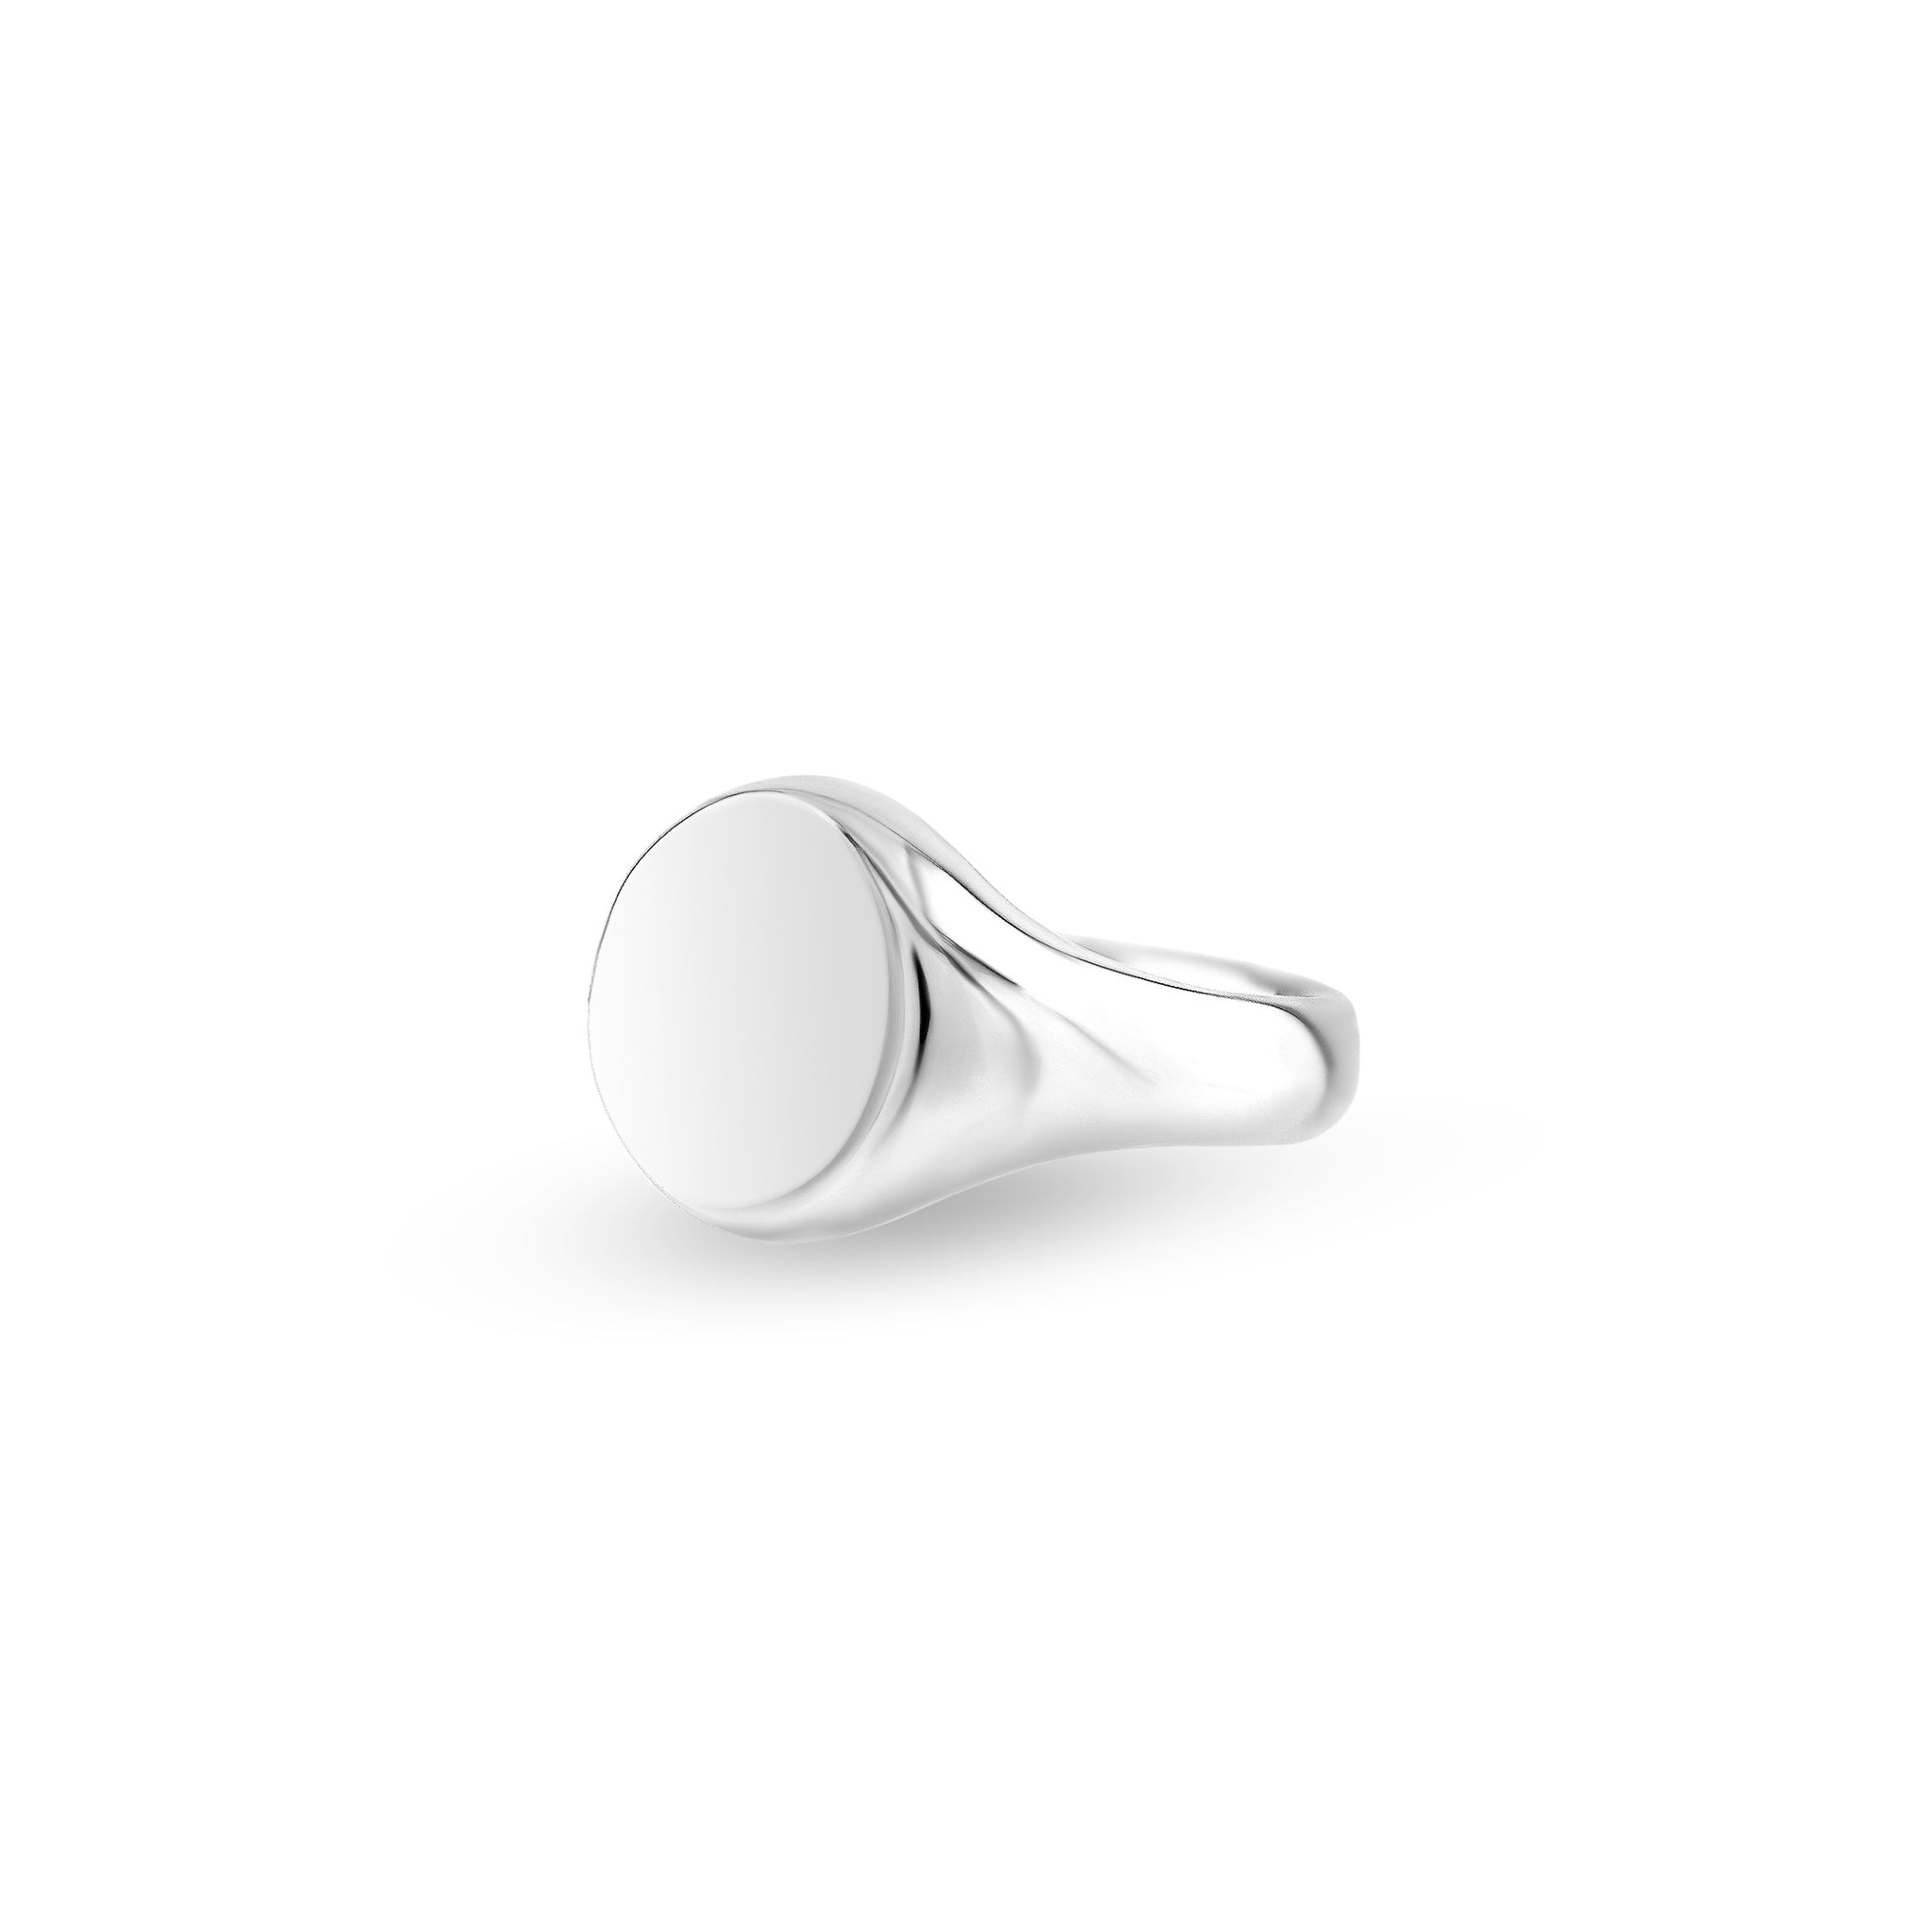 Silver 13 x 11mm Oval Signet Ring